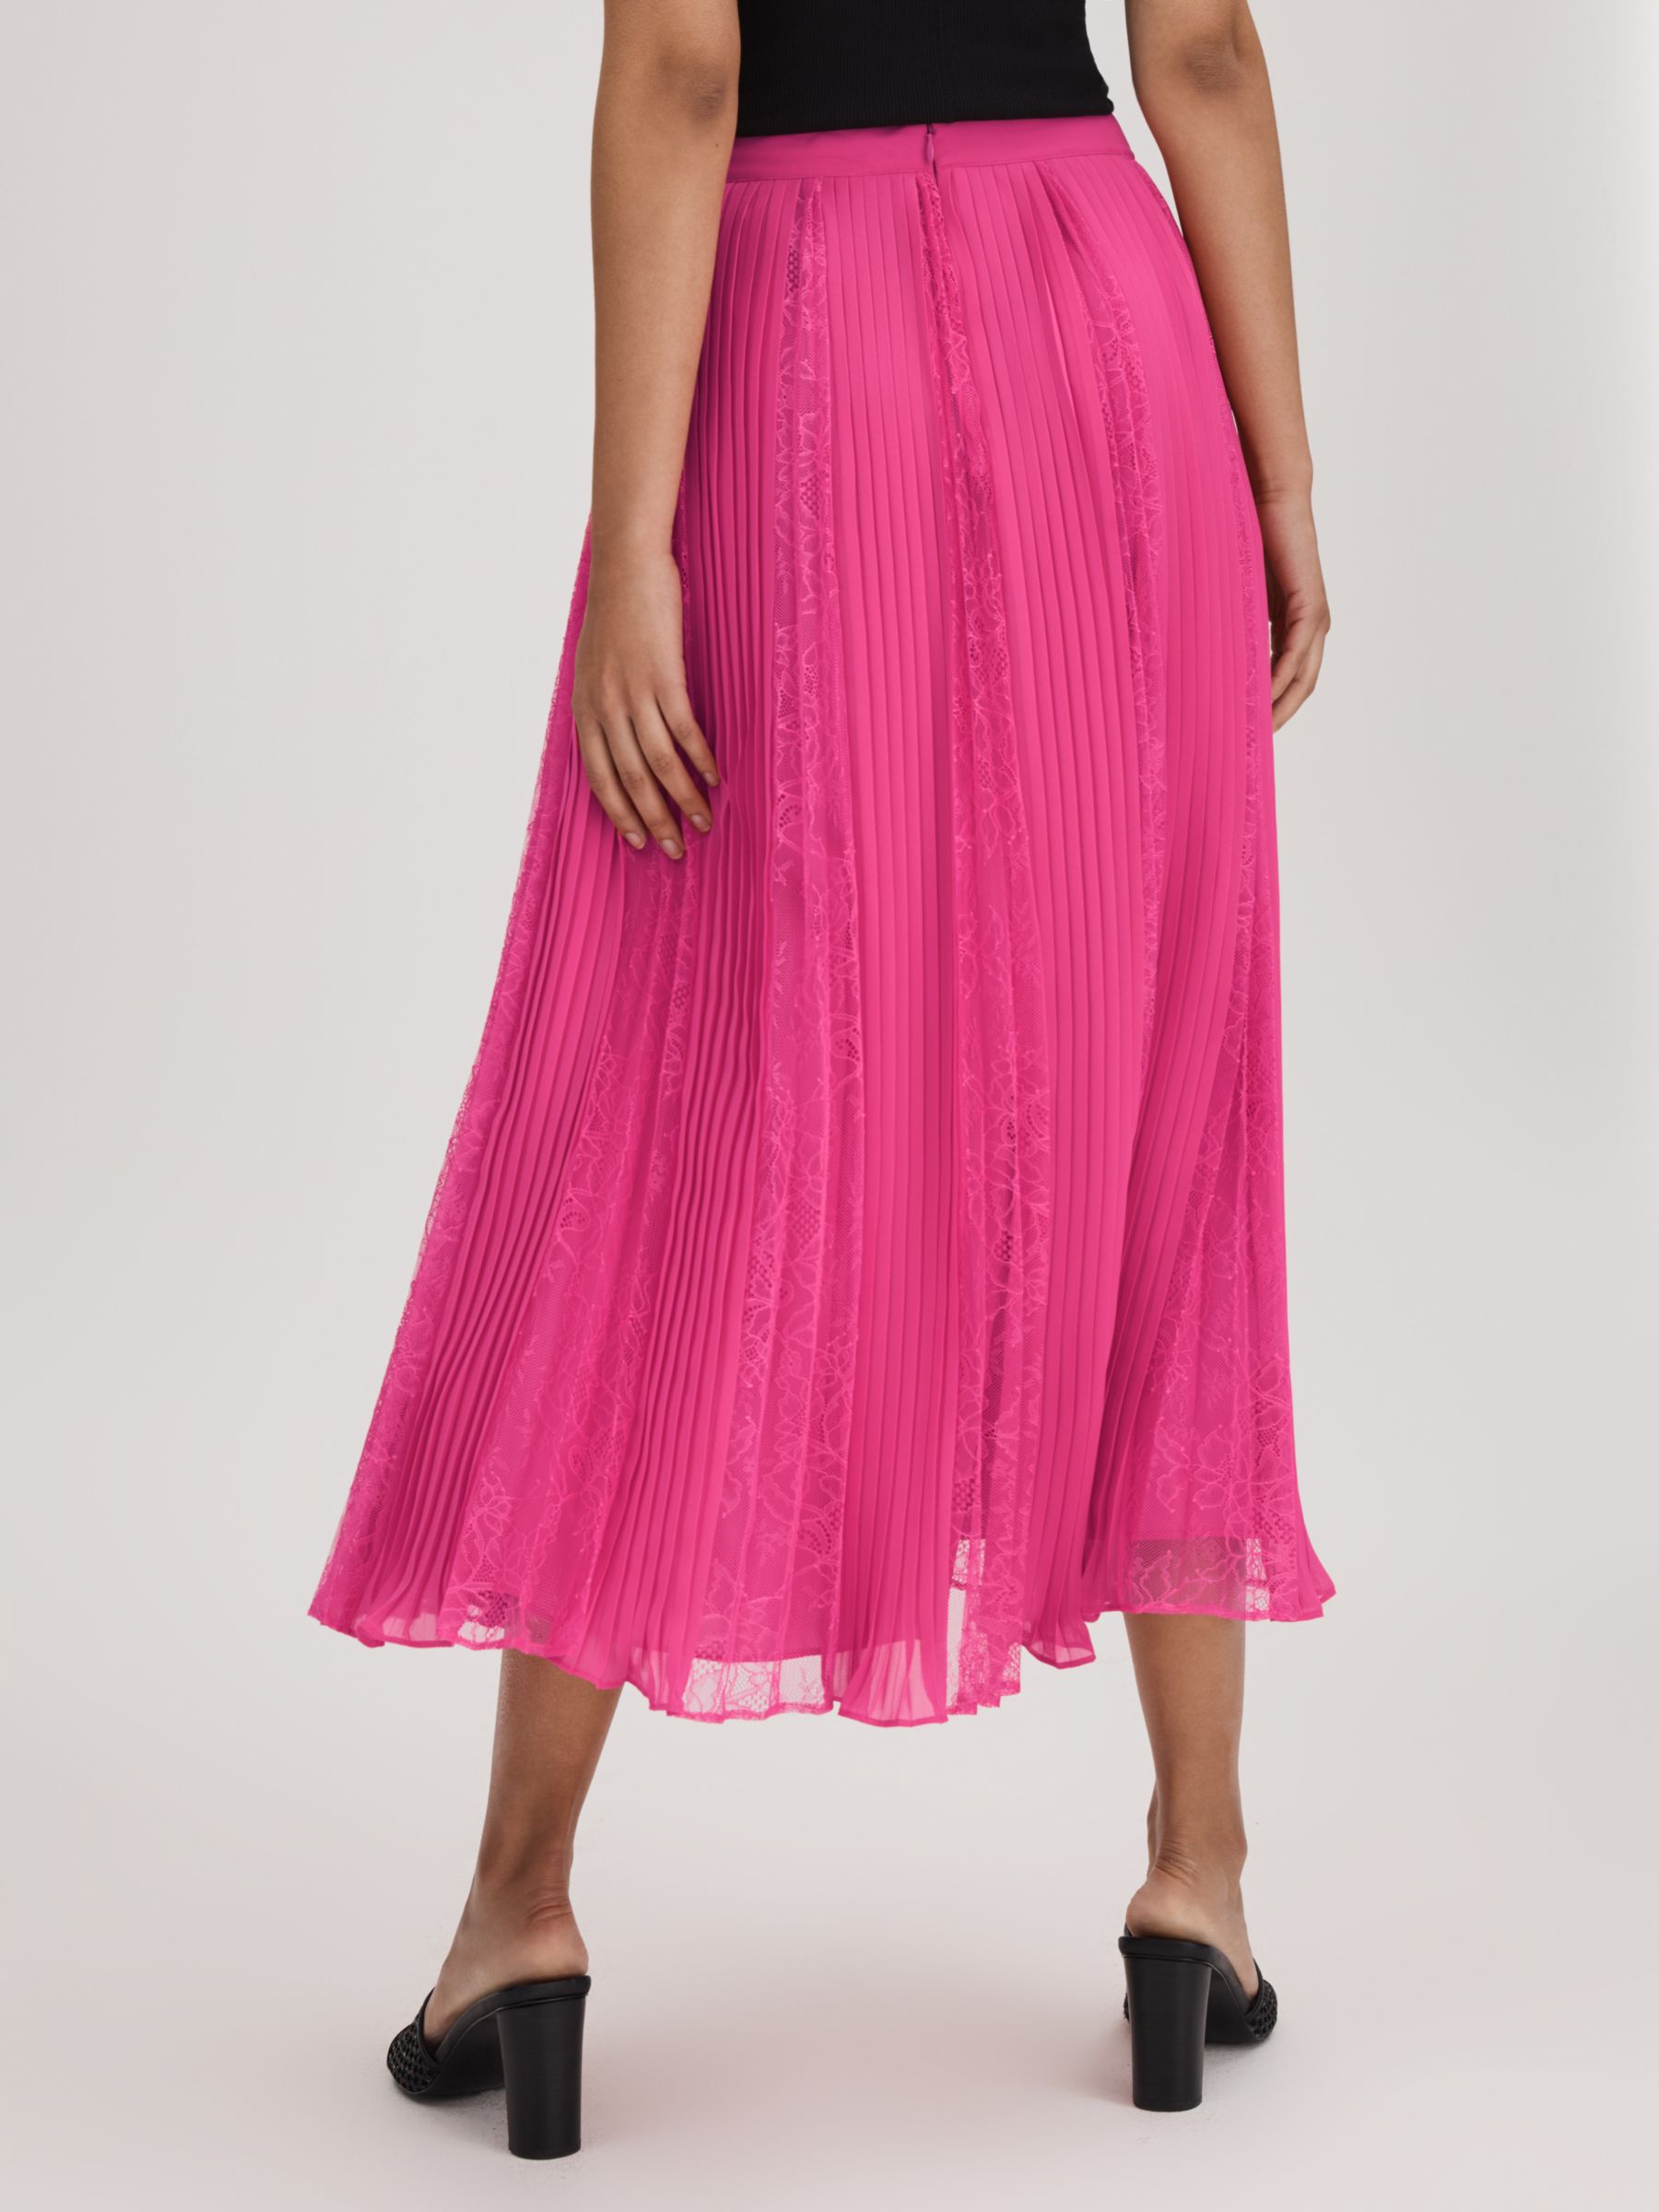 FLORERE Lace Insert Pleated Midi Skirt, Bright Pink, 12